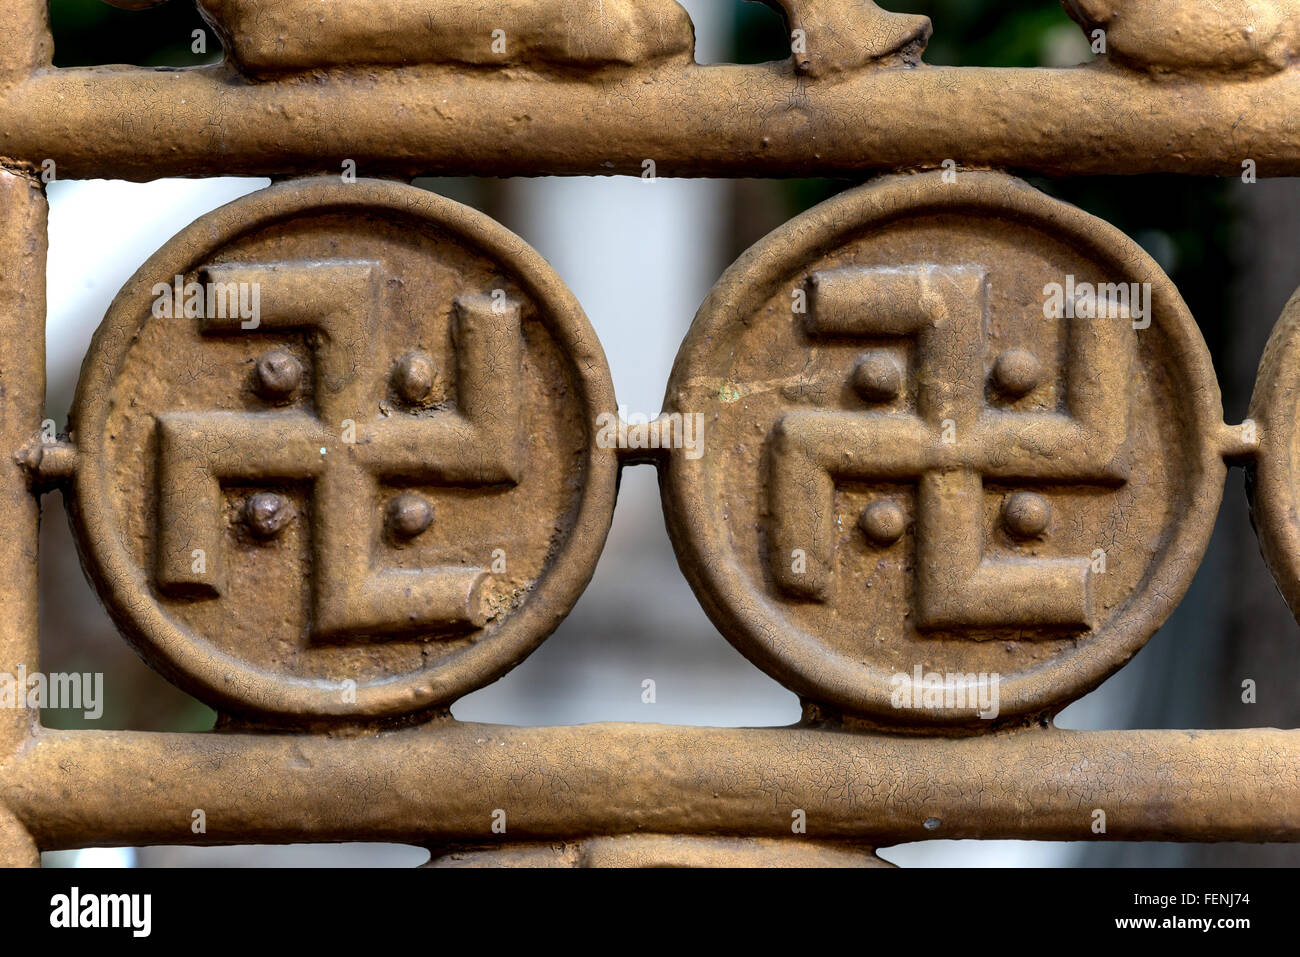 The decorated gates of the Numismatic Museum of Athens Greece. Stock Photo